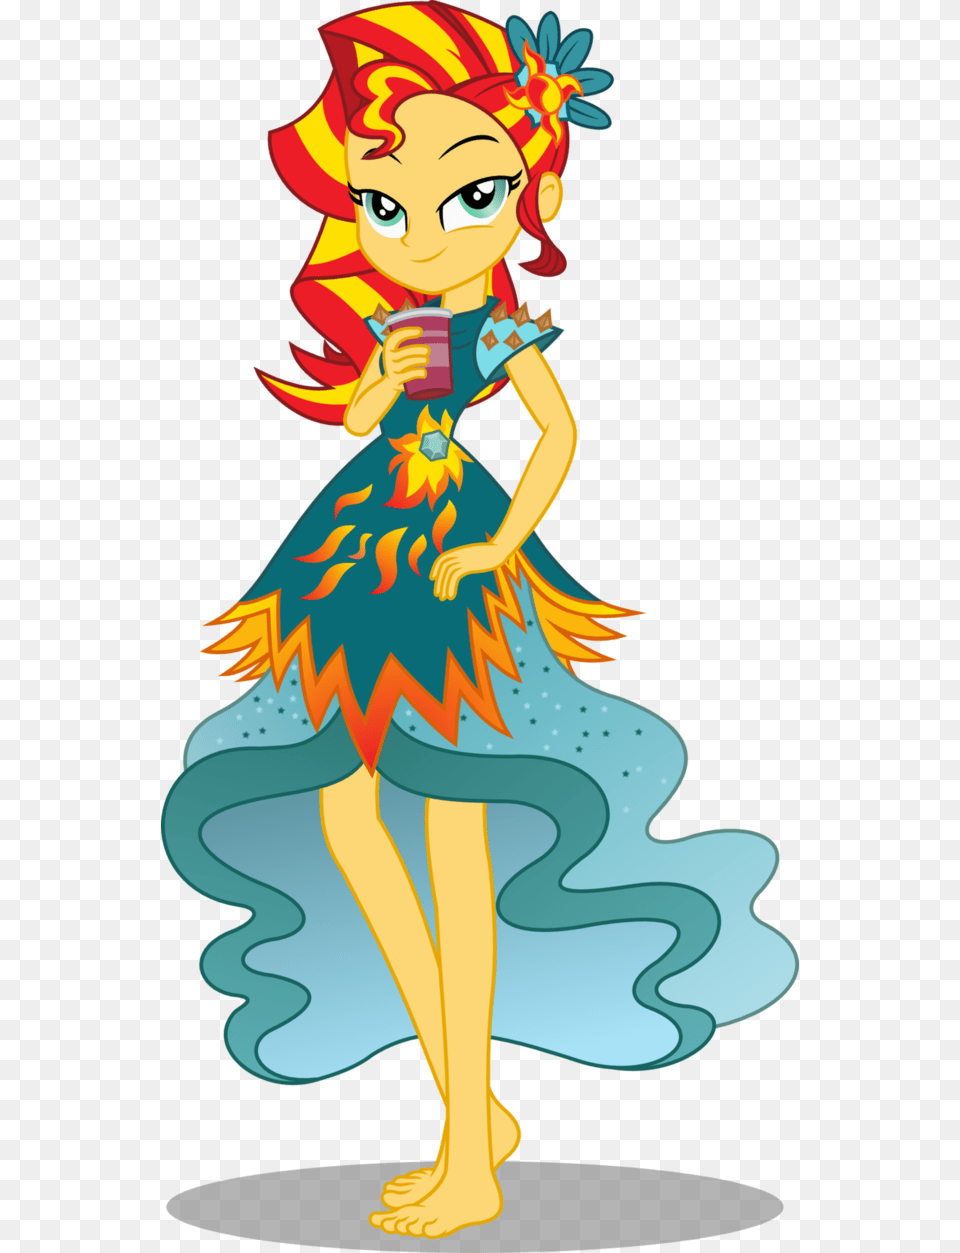 By Request For Equestria Girls Legend Of Everfree Sunset Shimmer, Art, Graphics, Publication, Comics Free Transparent Png